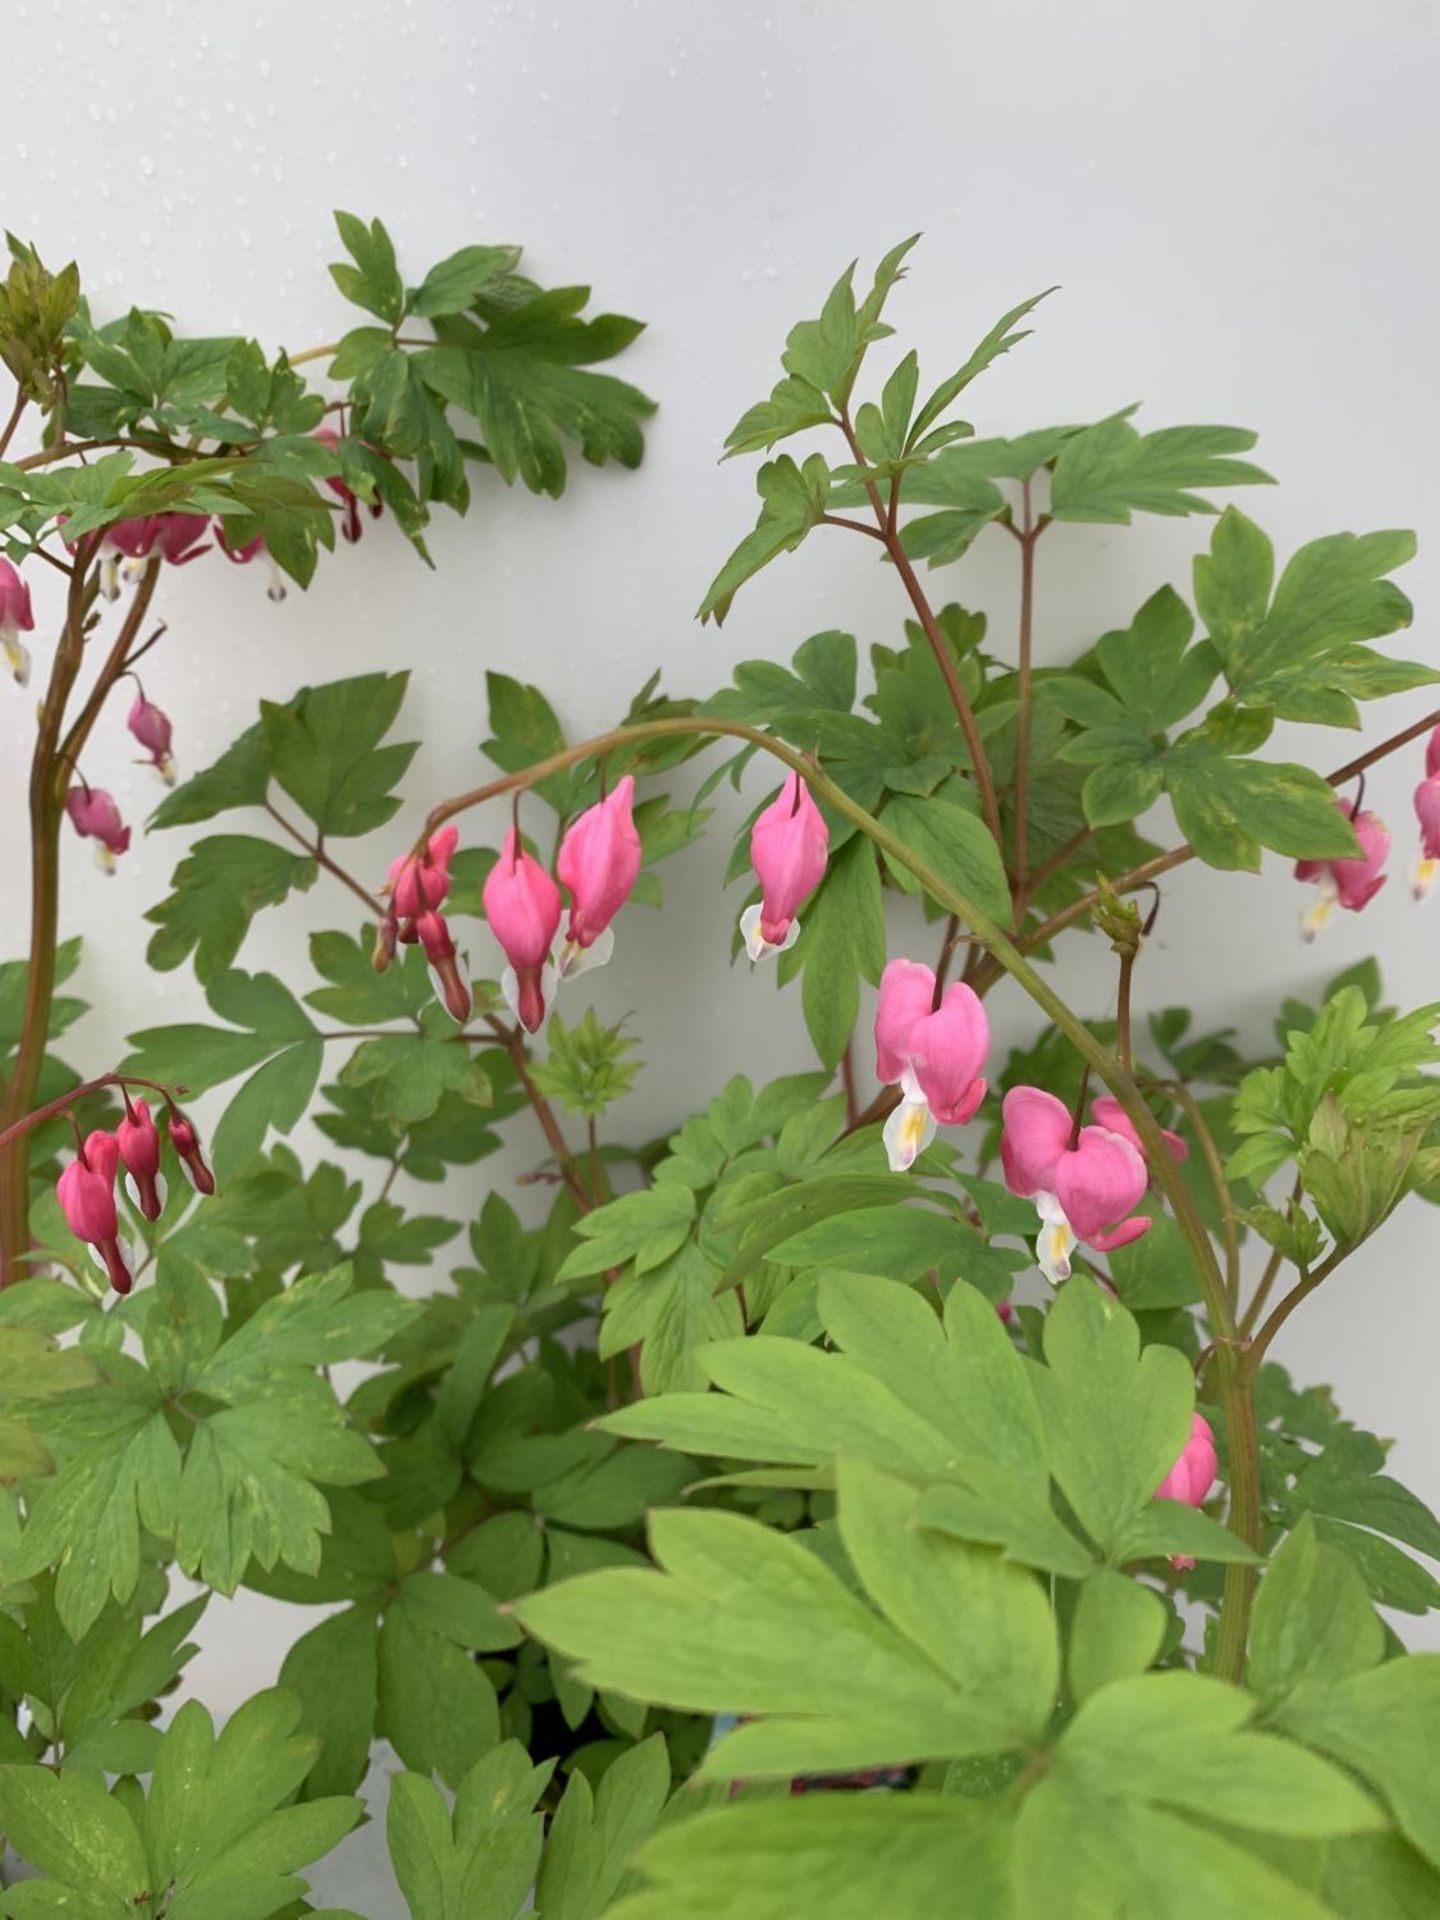 SIX DICENTRA SPECTABILIS BLEEDING HEART 50CM TALL IN 2 LTR POTS TO BE SOLD FOR THE SIX PLUS VAT - Image 8 of 9